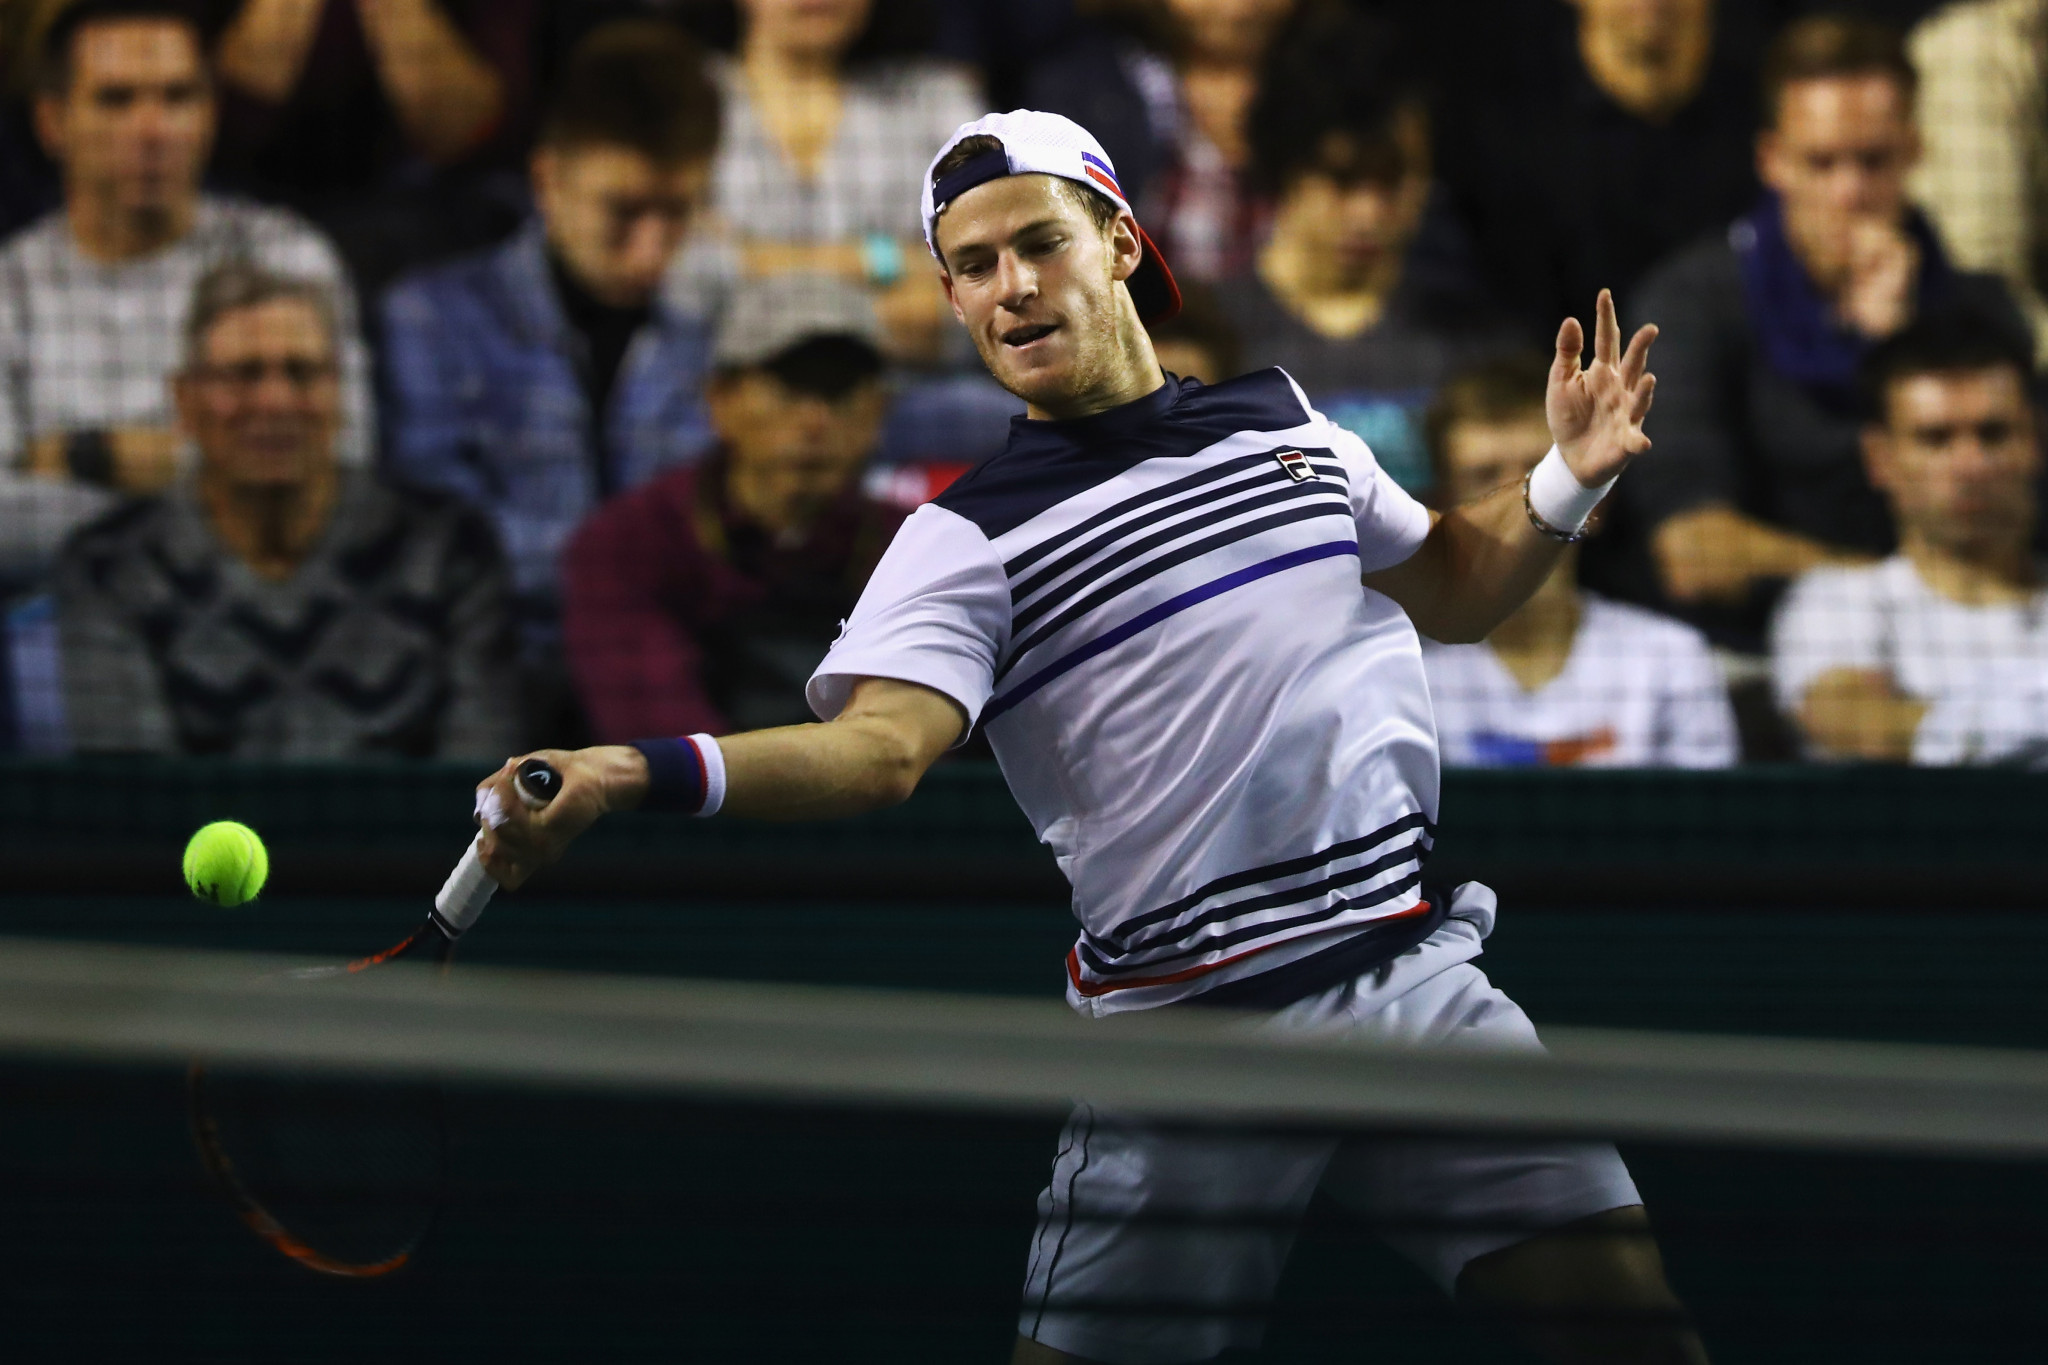 Argentina's Diego Schwartzman won his match at the Paris Masters today ©Getty Images